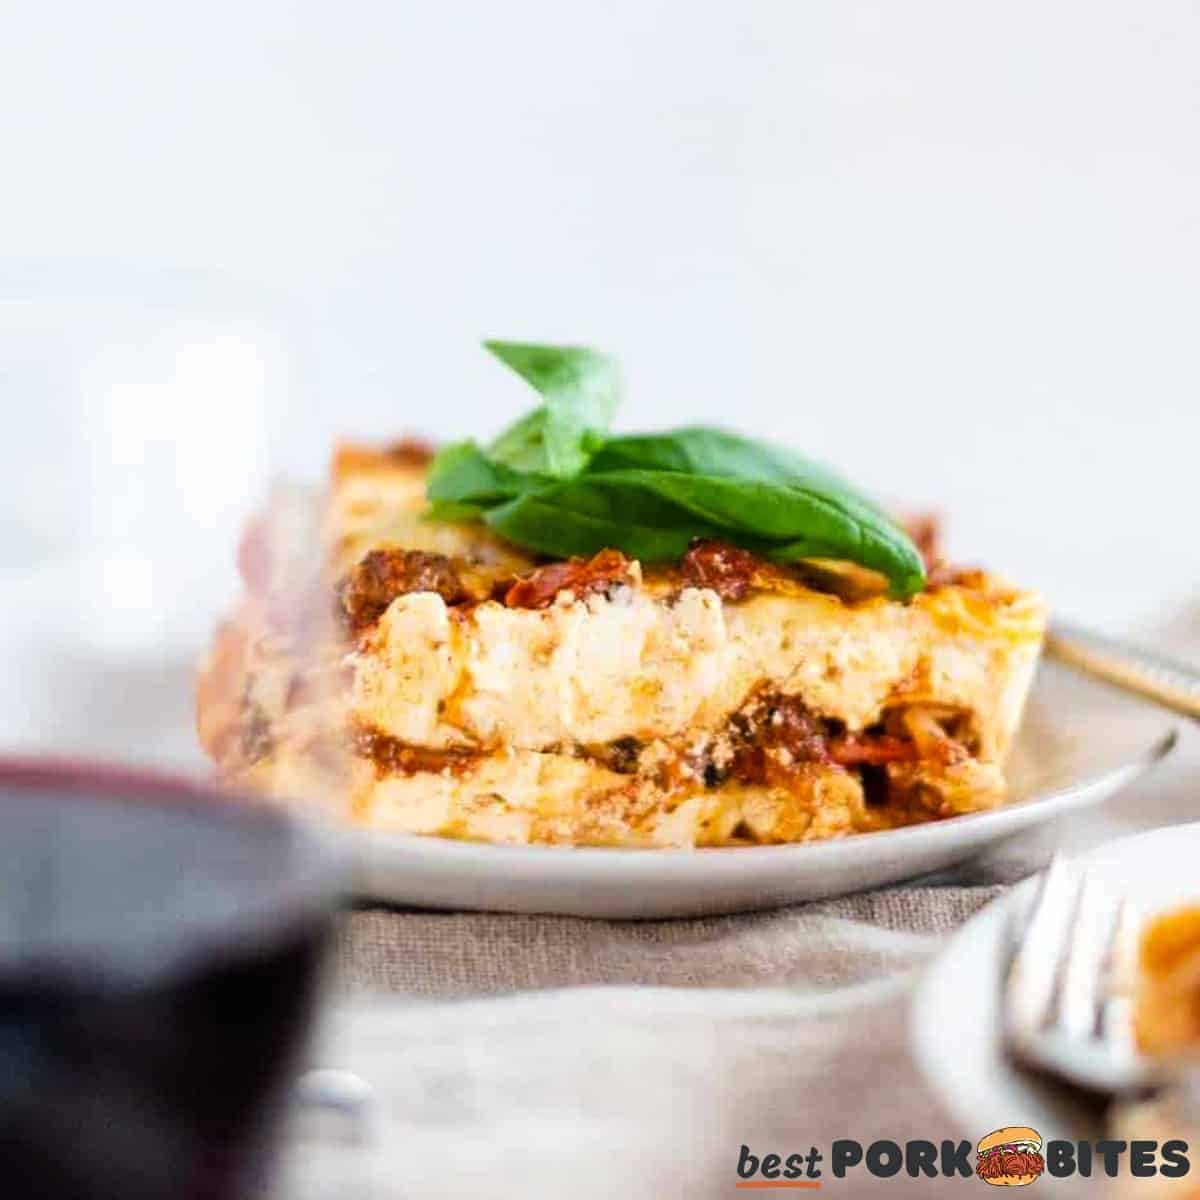 a white plate with a slice of lasagna on a towel with a plate and a glass of wine in front